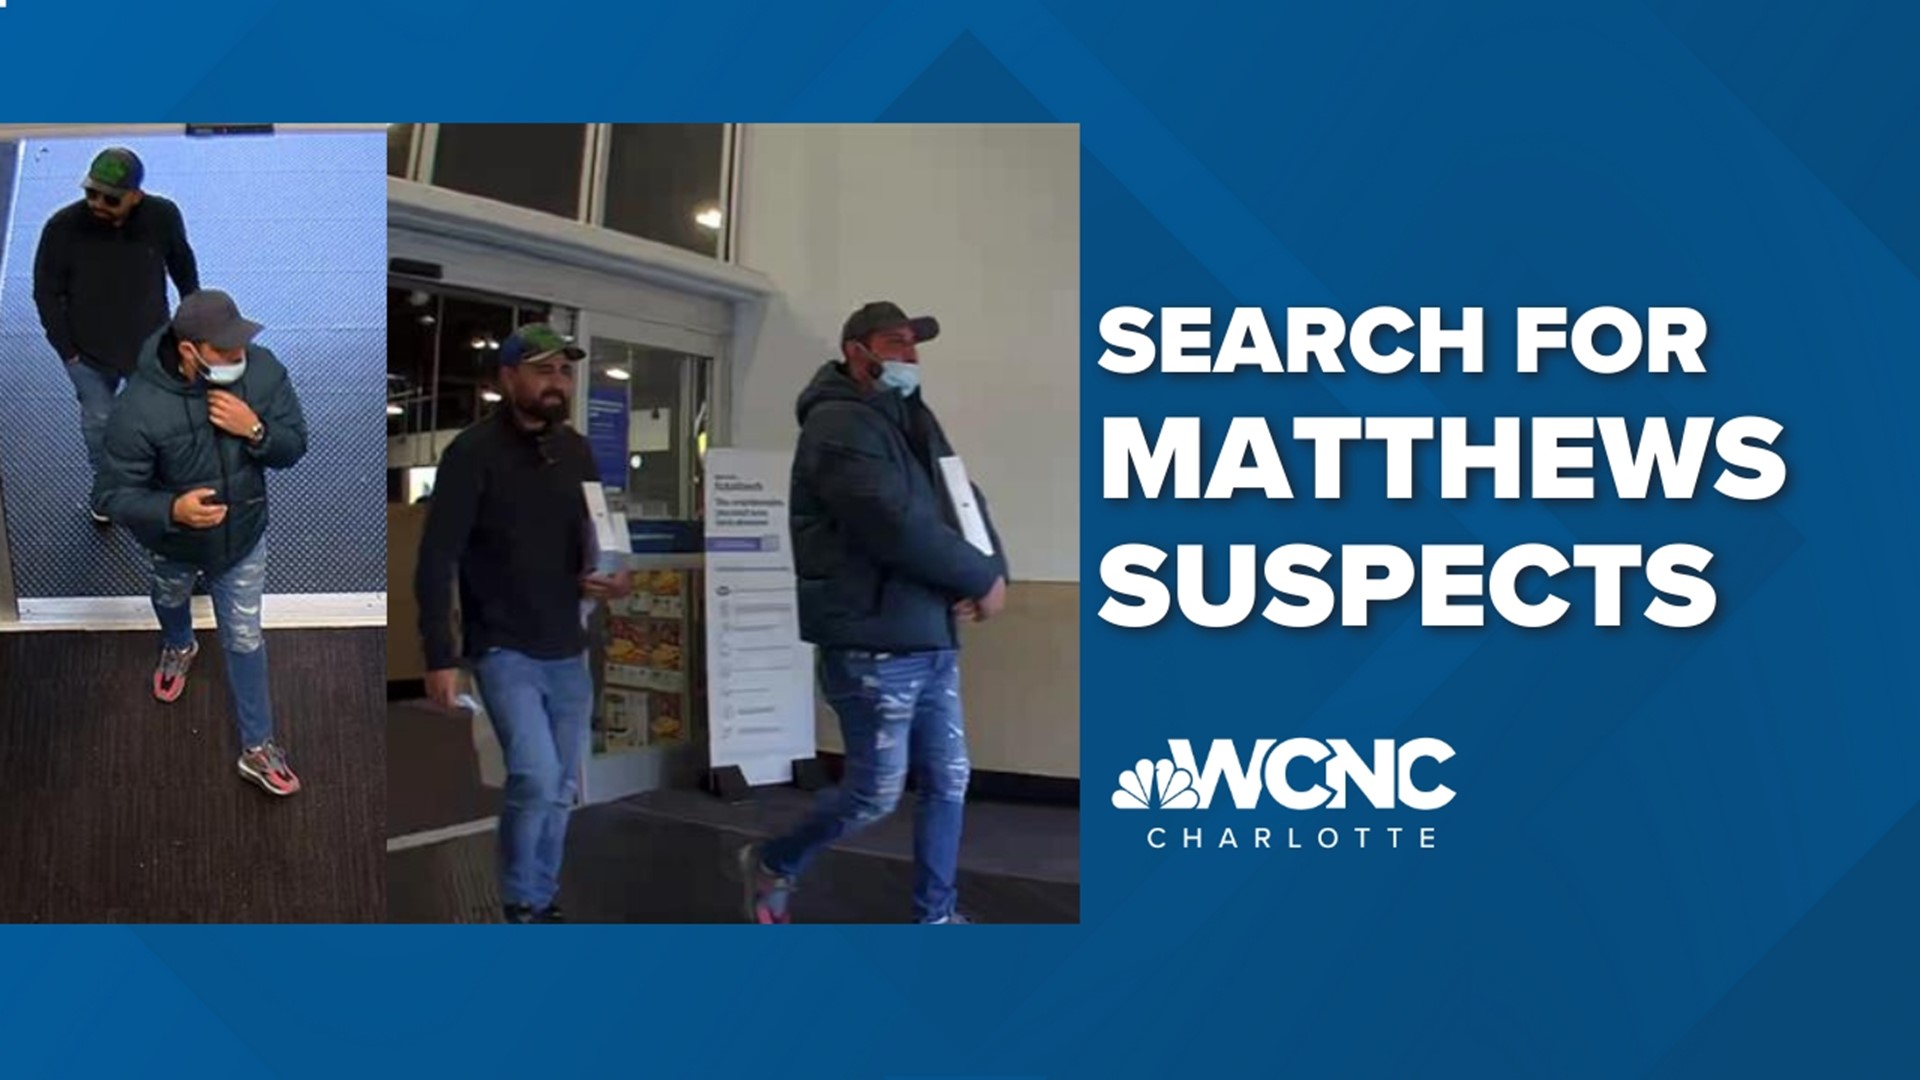 Matthews Police are asking for your help to find two suspects who bought almost $1,800 worth of stuff from Best Buy with a stolen credit card.